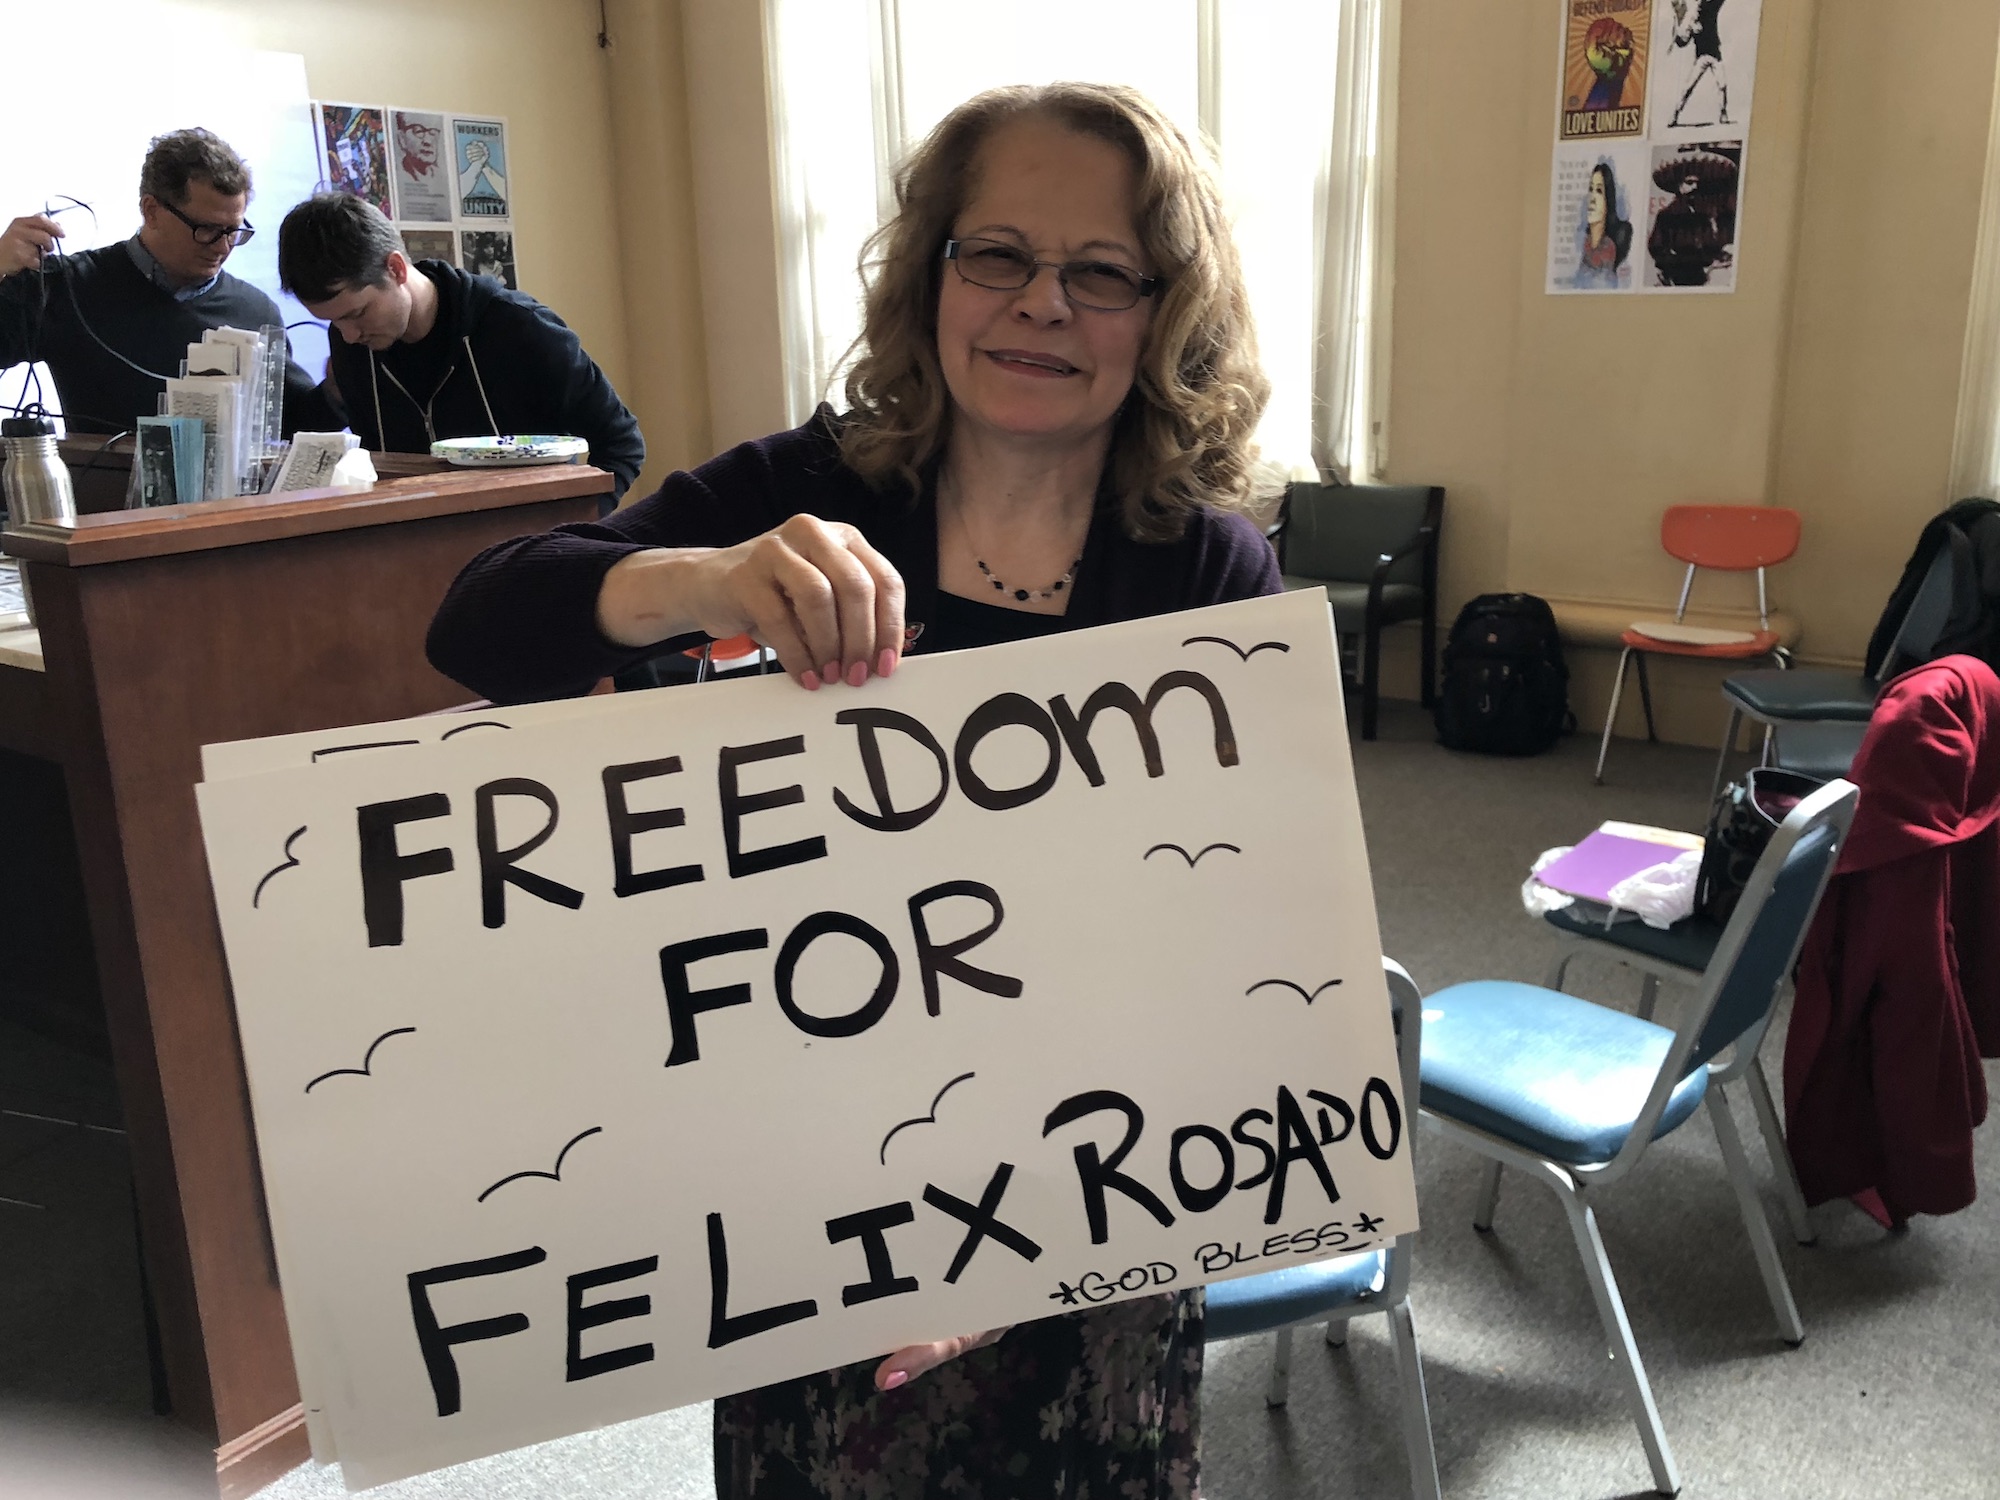 Iris Drey holds a sign that says 'Freedom for Felix Rosado' at a community meeting in Reading, PA